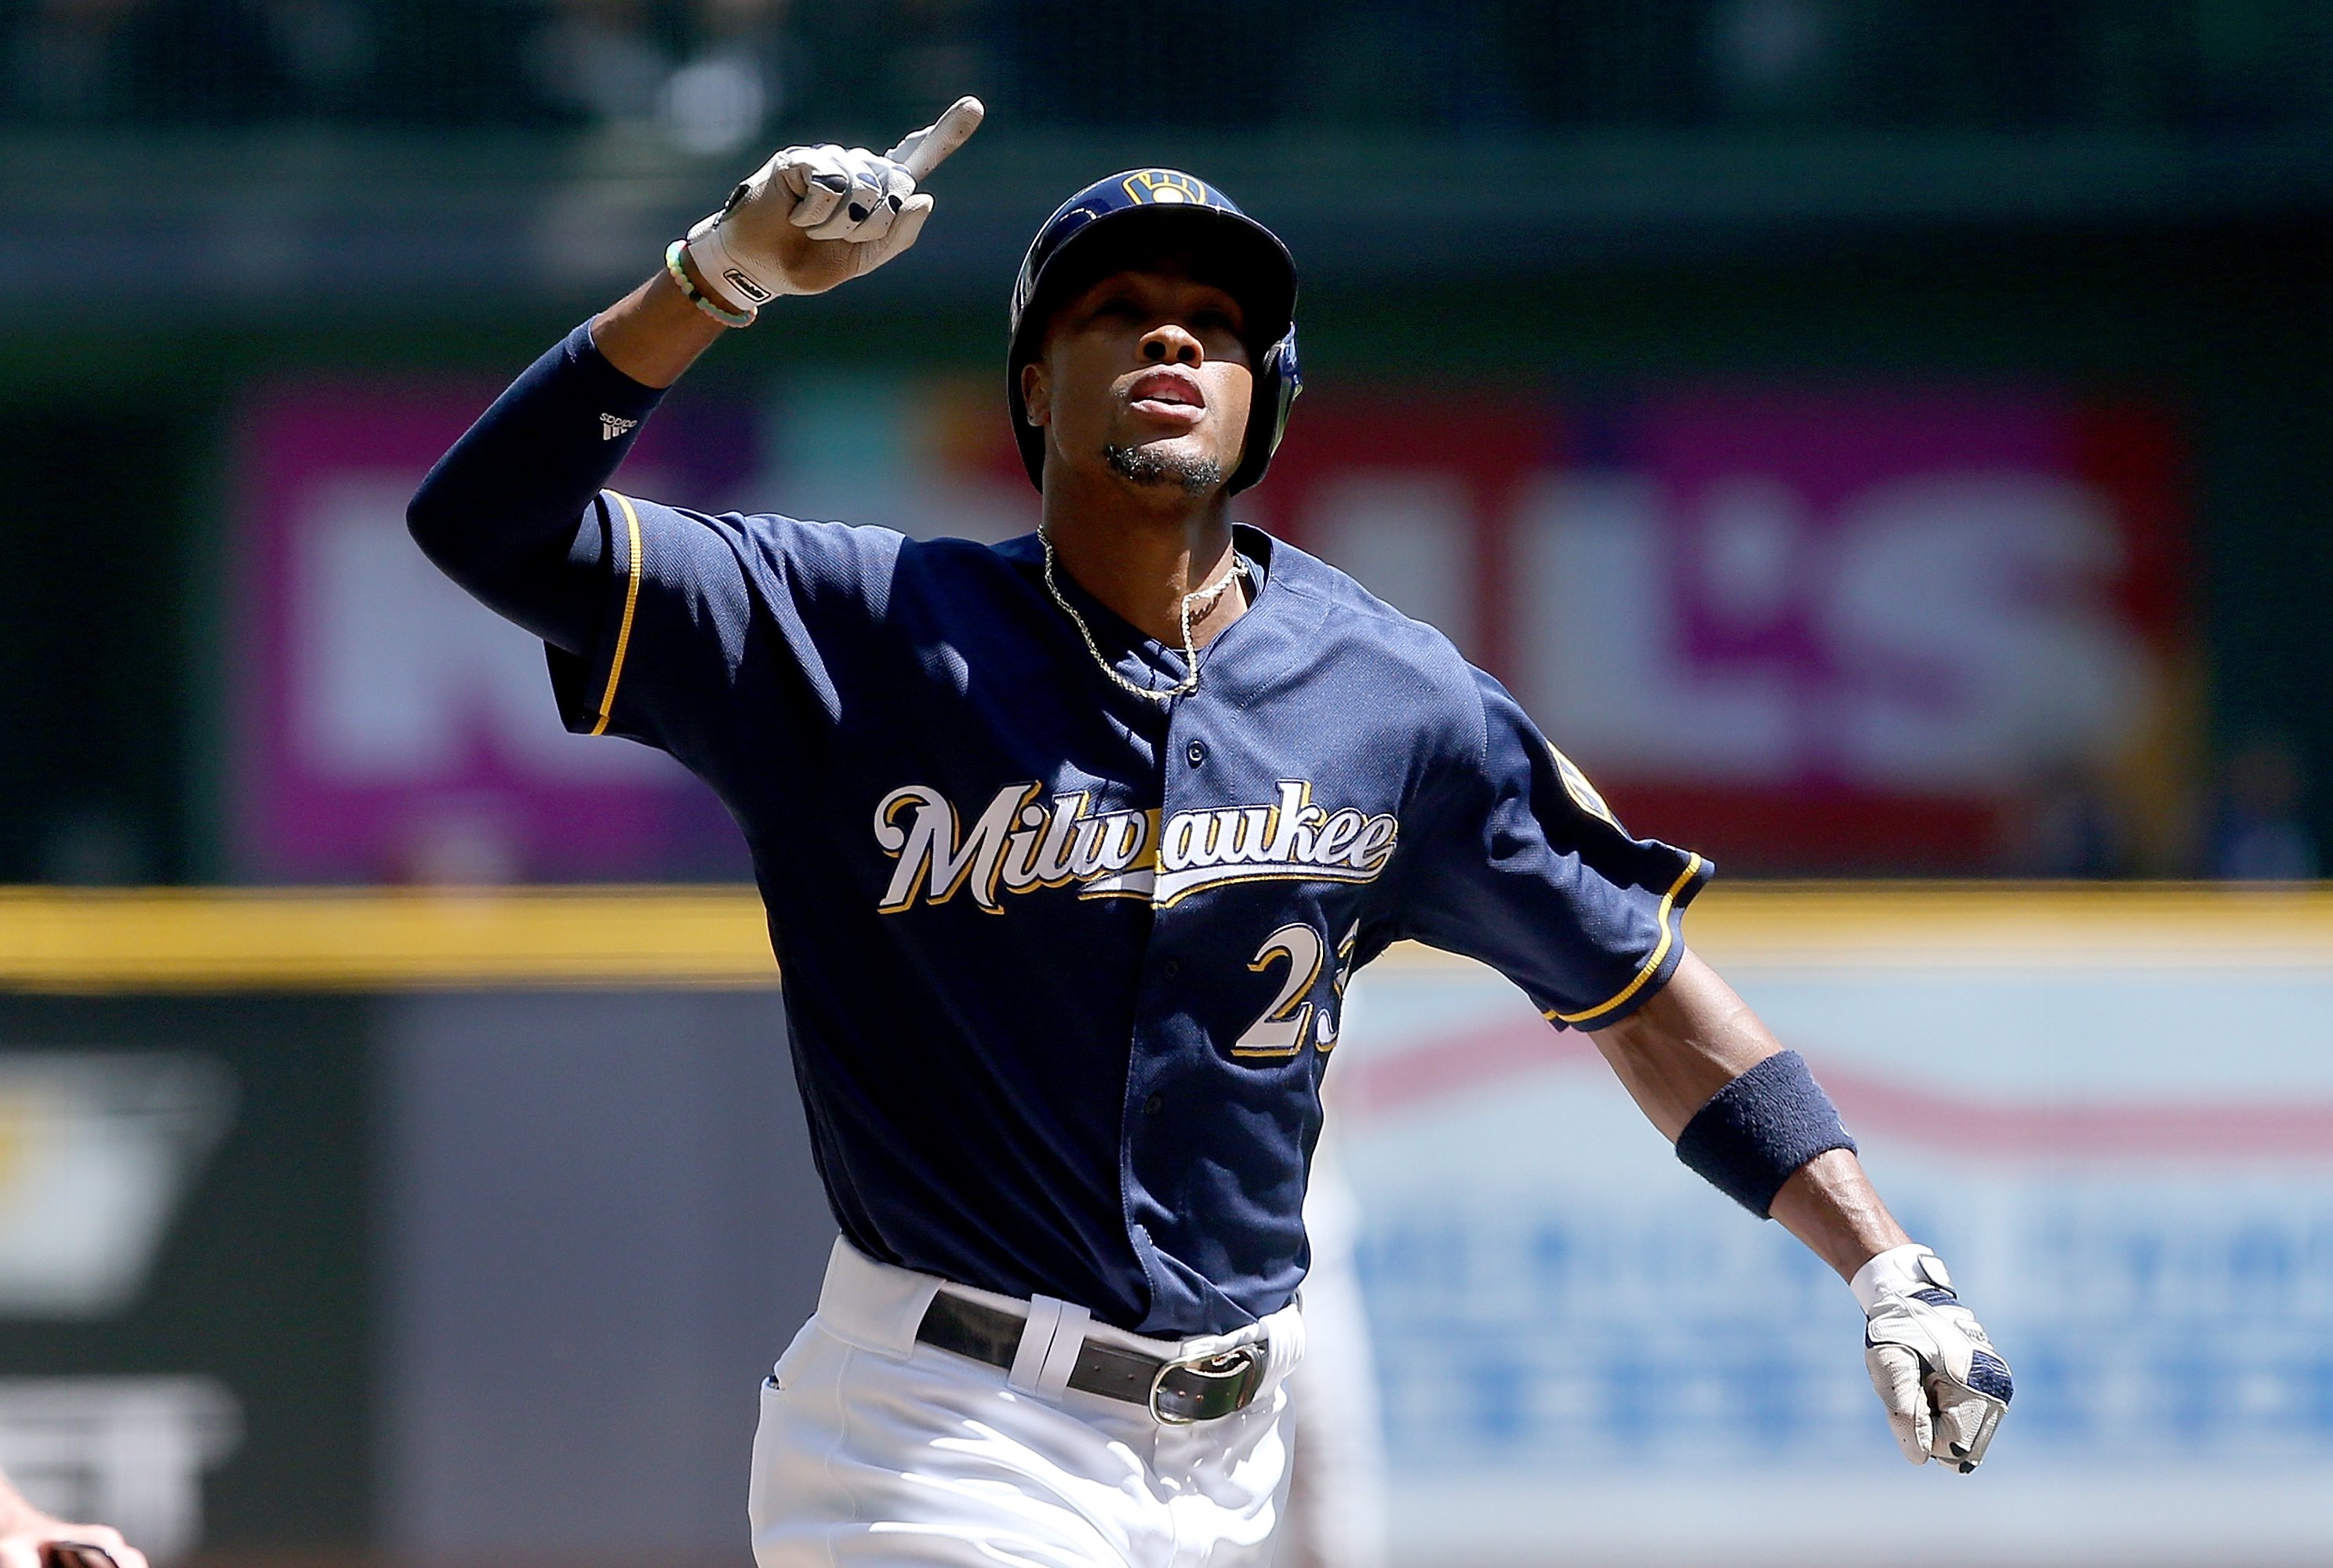 Shortstop: Orlando Arcia aiming to carry strong finish at the plate to 2019